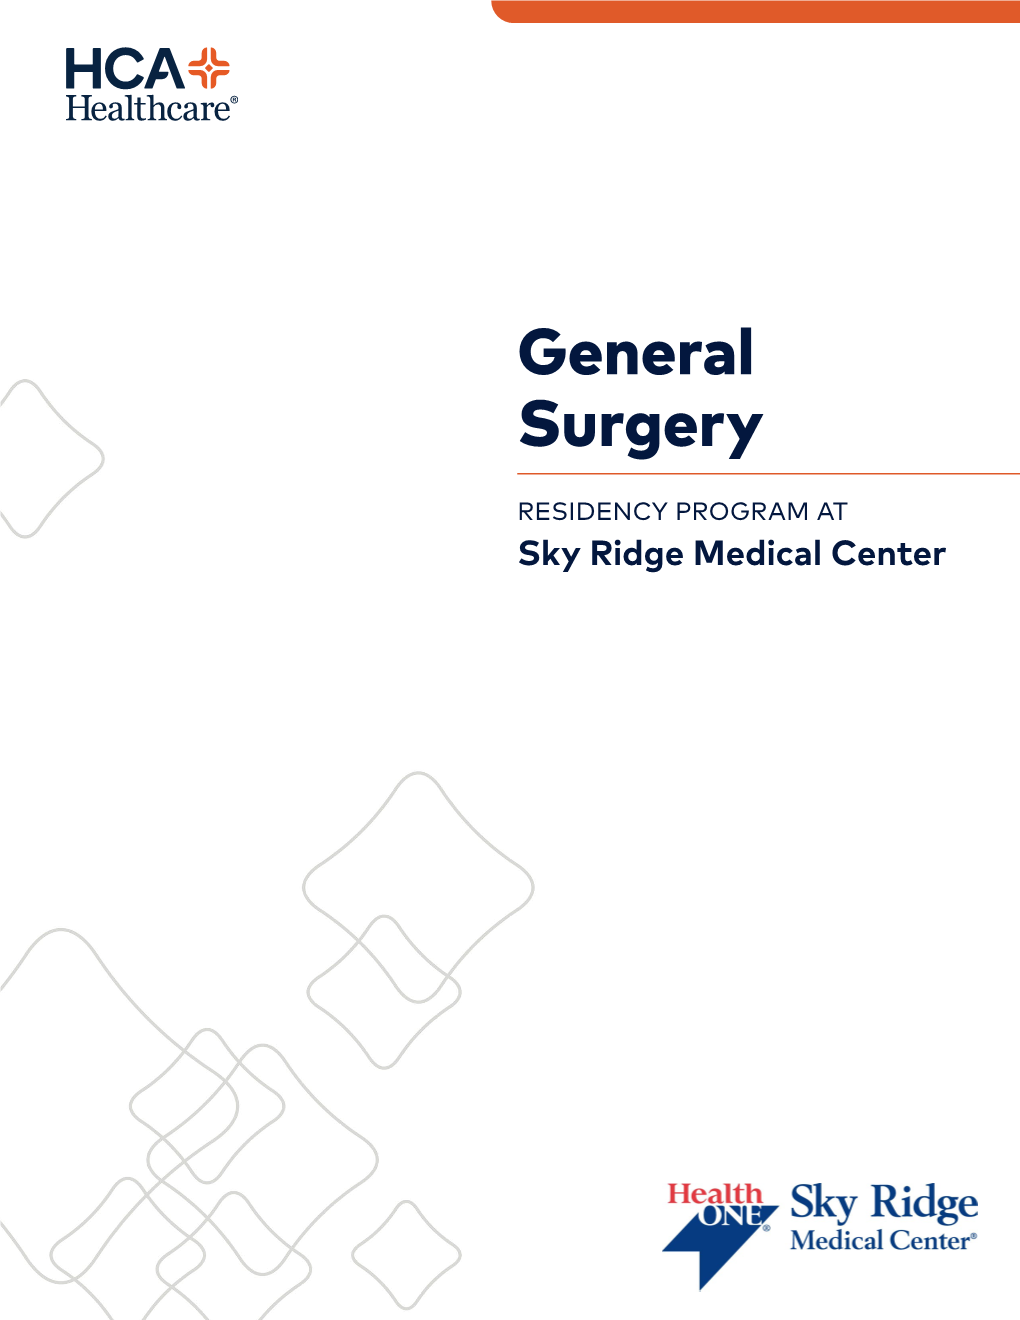 General Surgery Residency Program at Sky Ridge Medical Center Is Part of the HCA Healthcare Graduate Medical Education Network